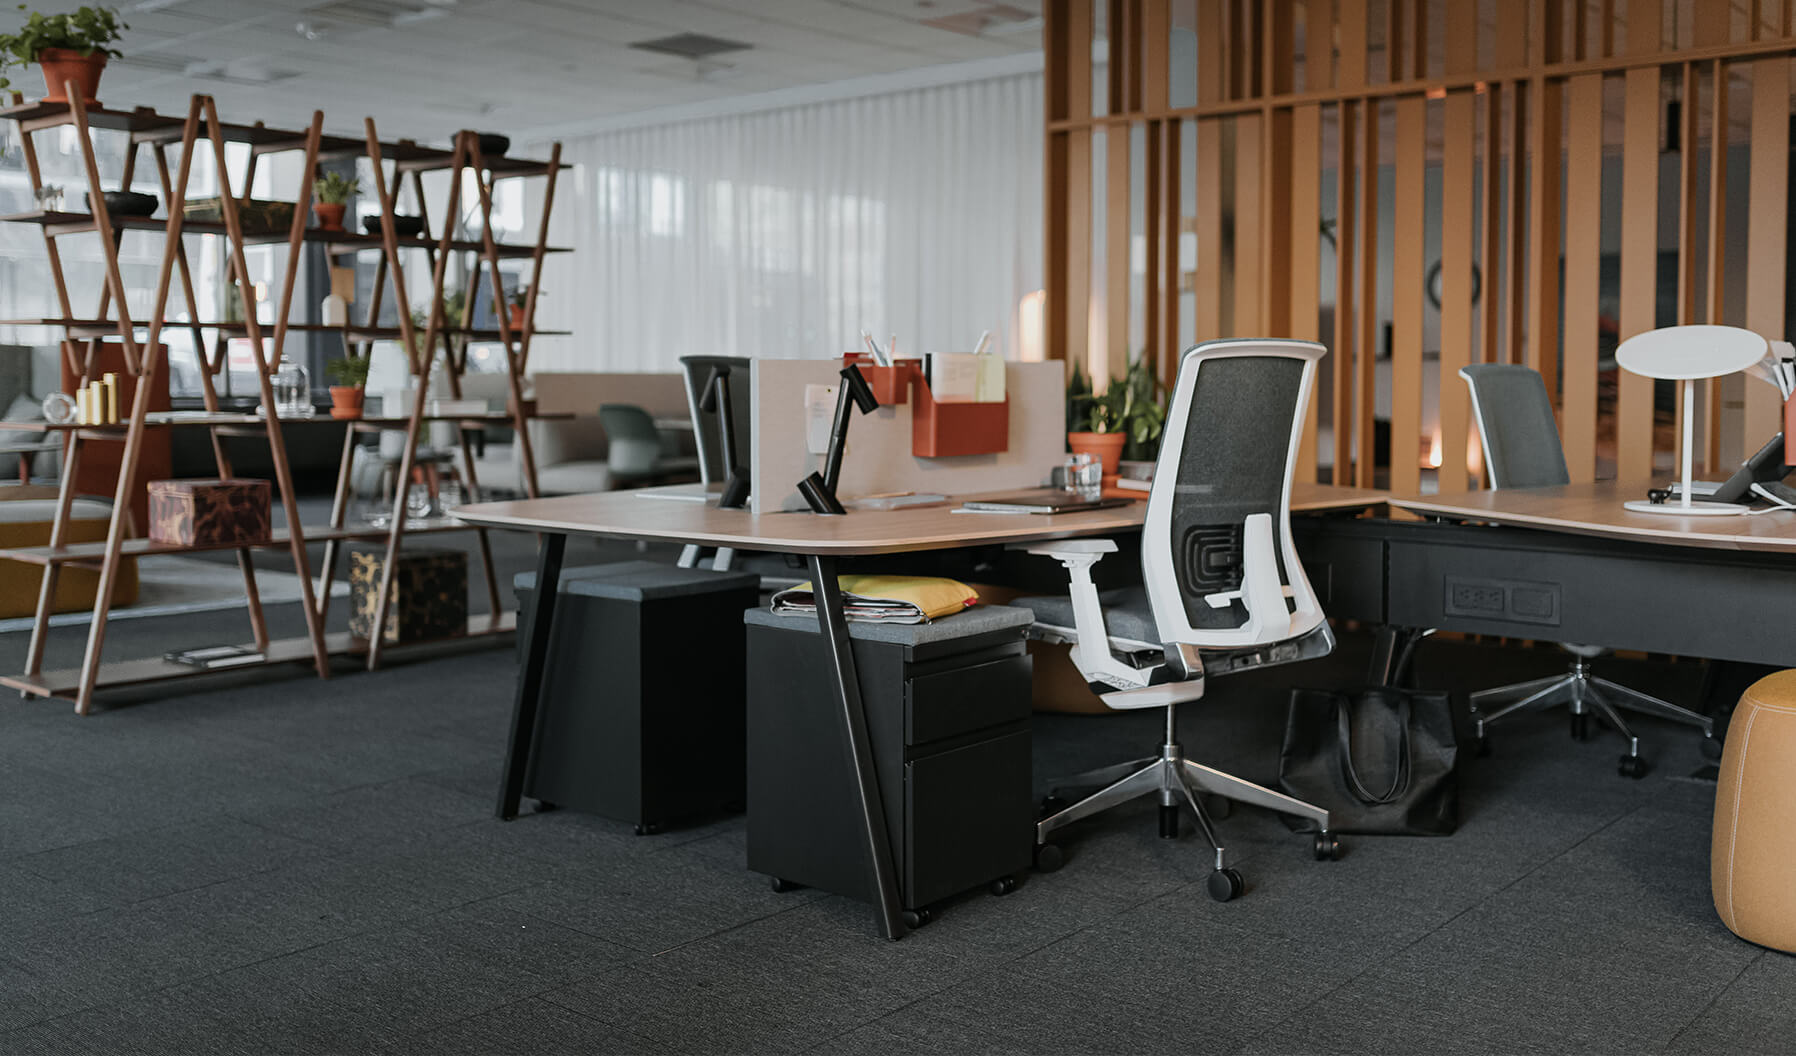 The layering of spaces is demonstrated here in showing how a
workstation can be a close neighbor to other Social Spaces and lounge
areas. This environment allows for work to be done but the ability to be
connected to what is happening within the office environment.